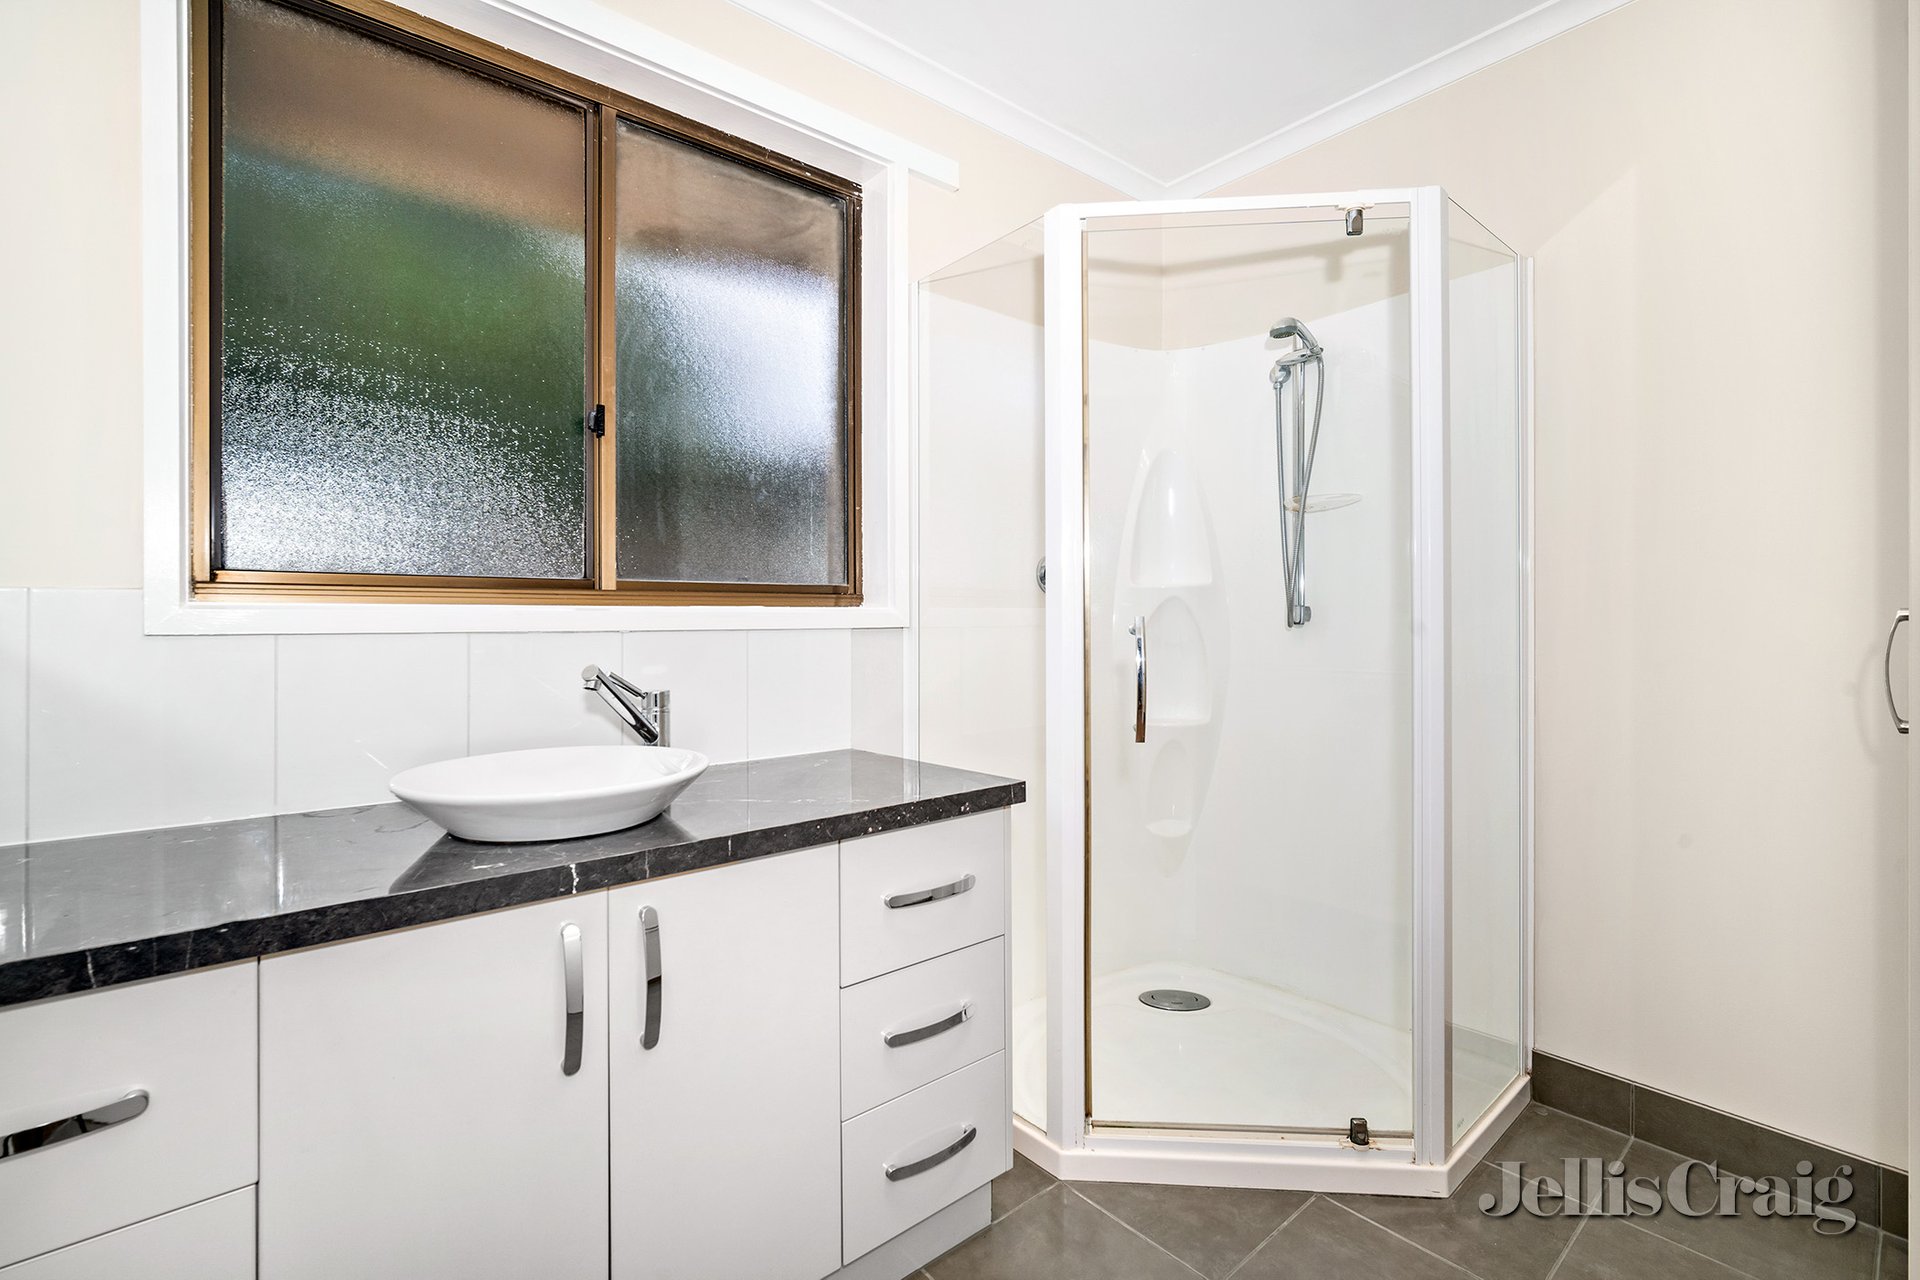 2/120 Cuthberts Road, Alfredton image 5